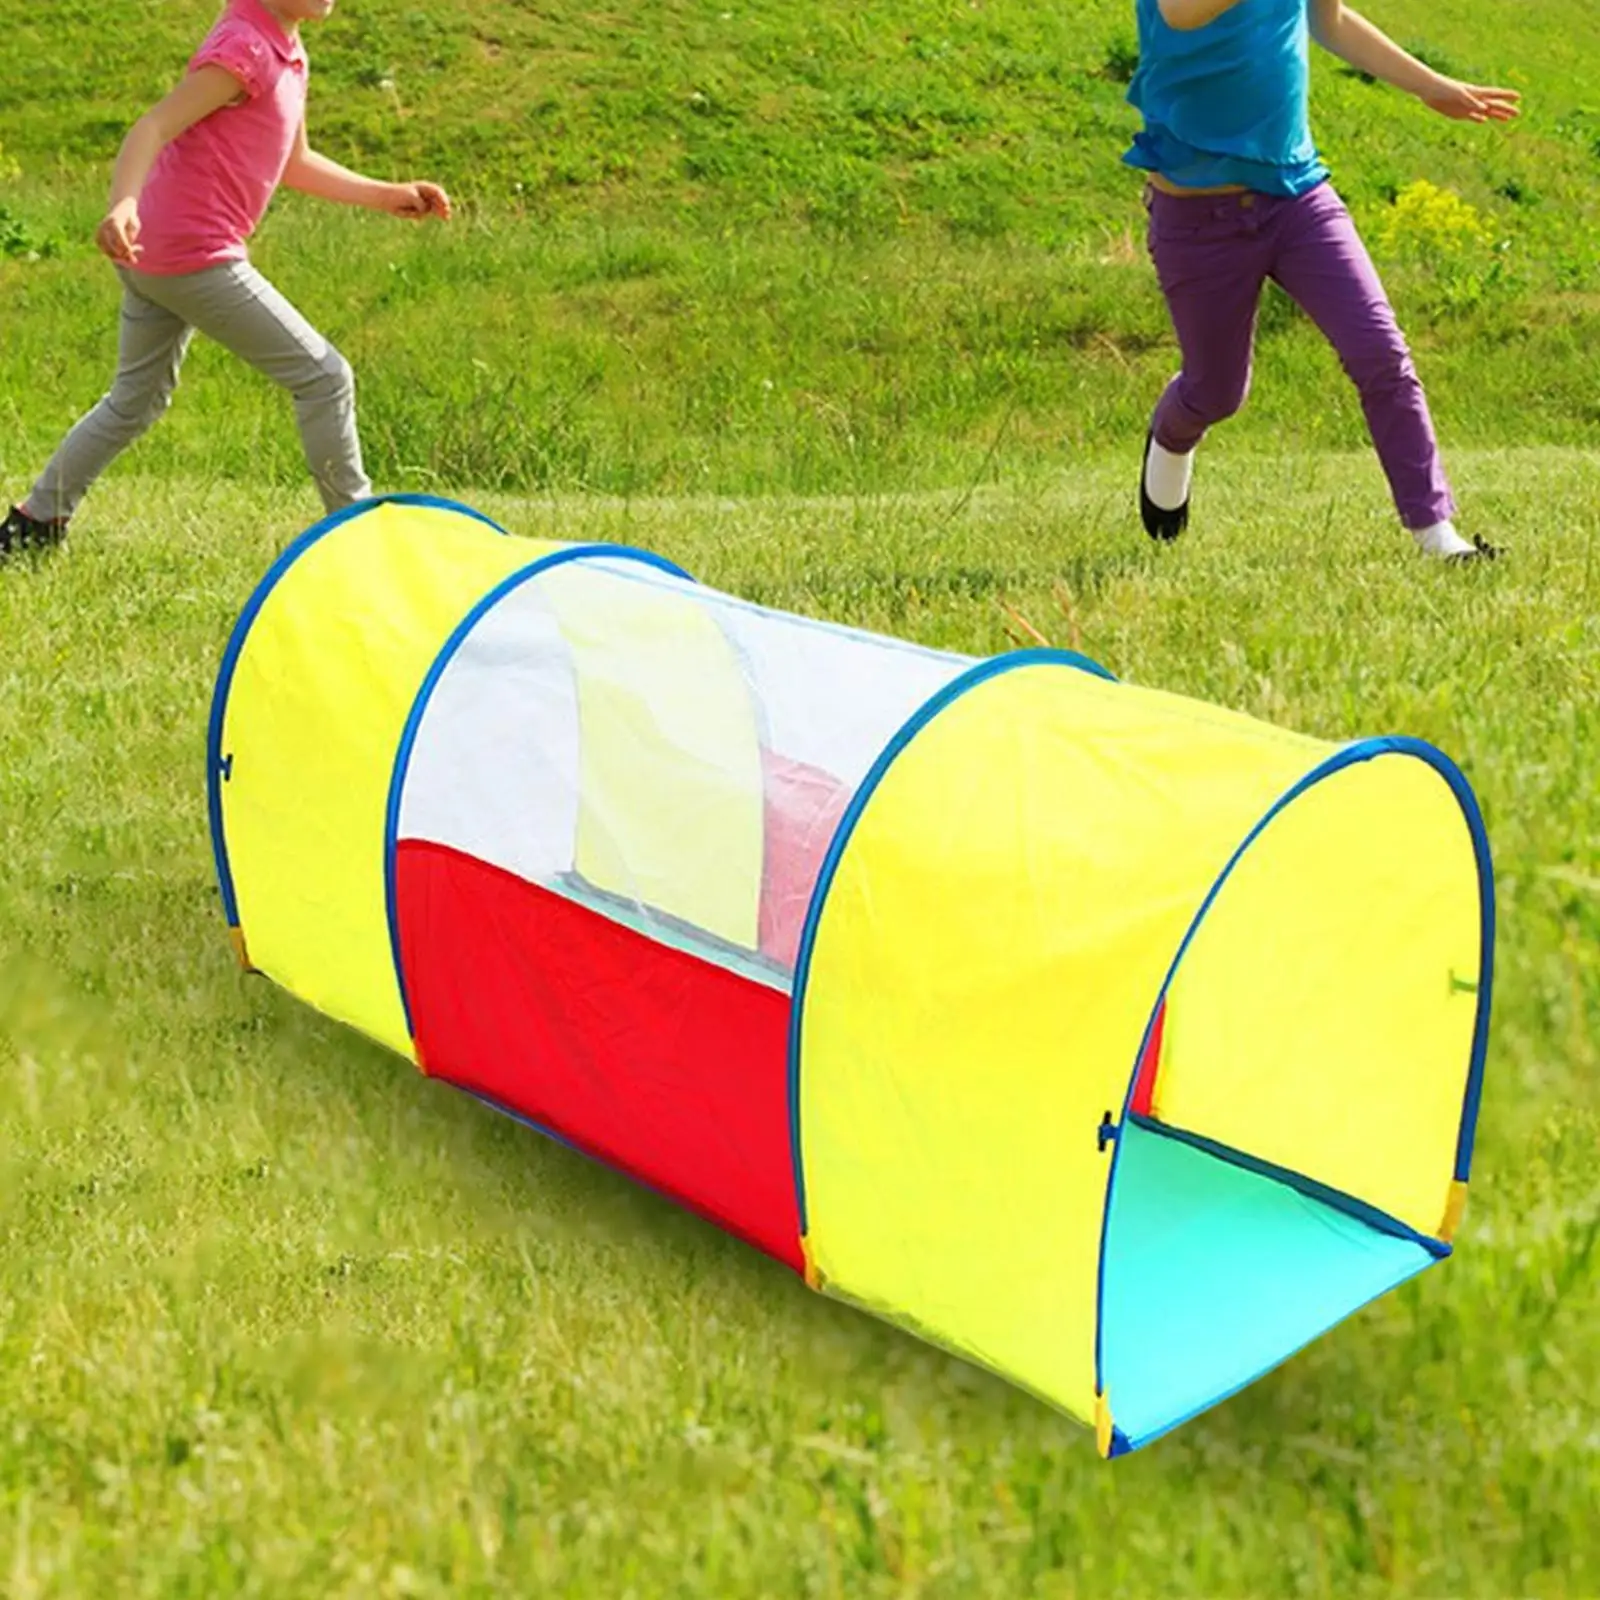 Portable Play Tent Toy Indoor Outdoor Toy Colorful Crawl Tunnel Toy for Girls Boys Children